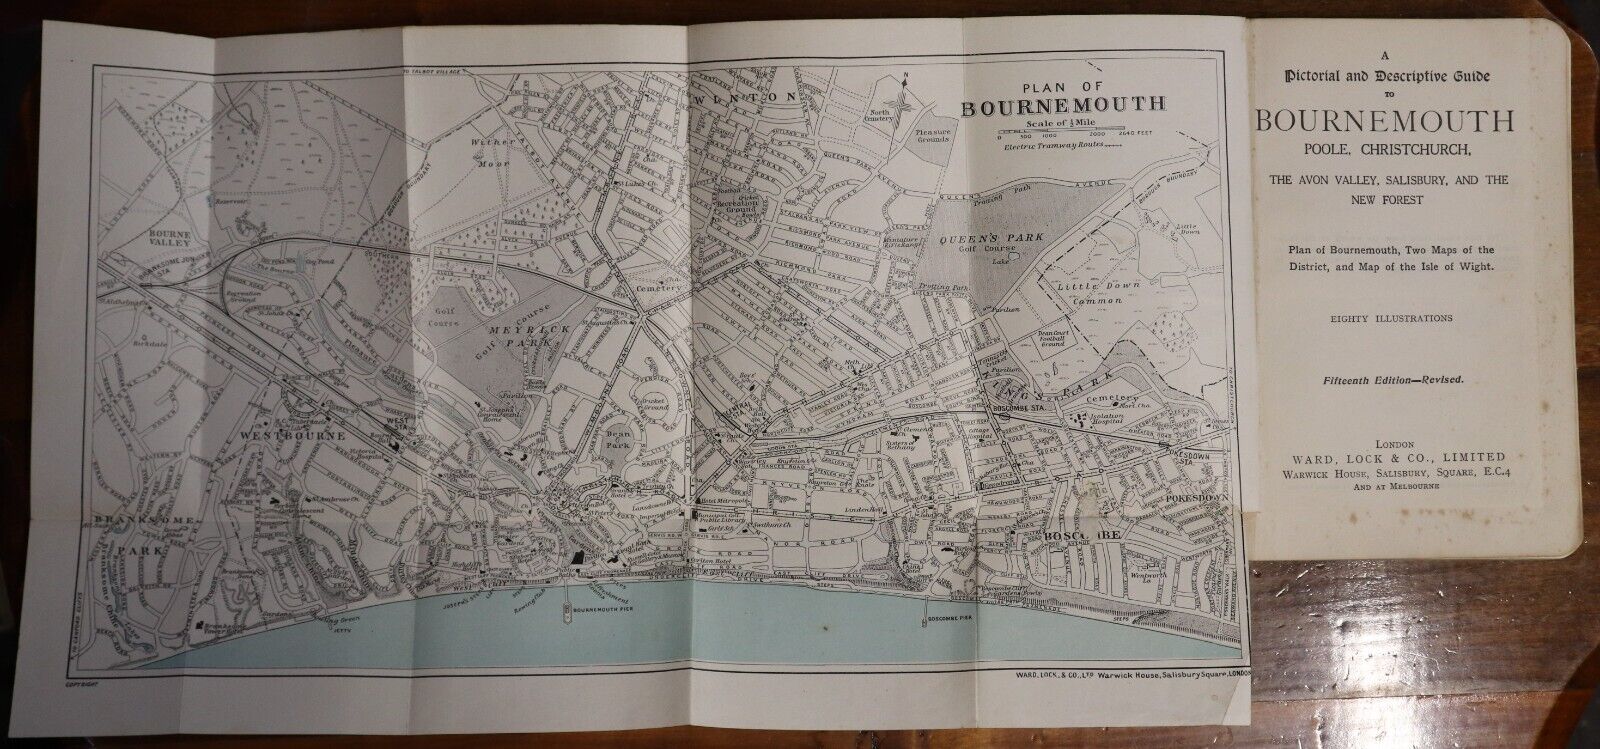 Guide To Bournemouth: Ward Lock & Co - 1927 - Antique Travel Guide Book w/Maps - 0